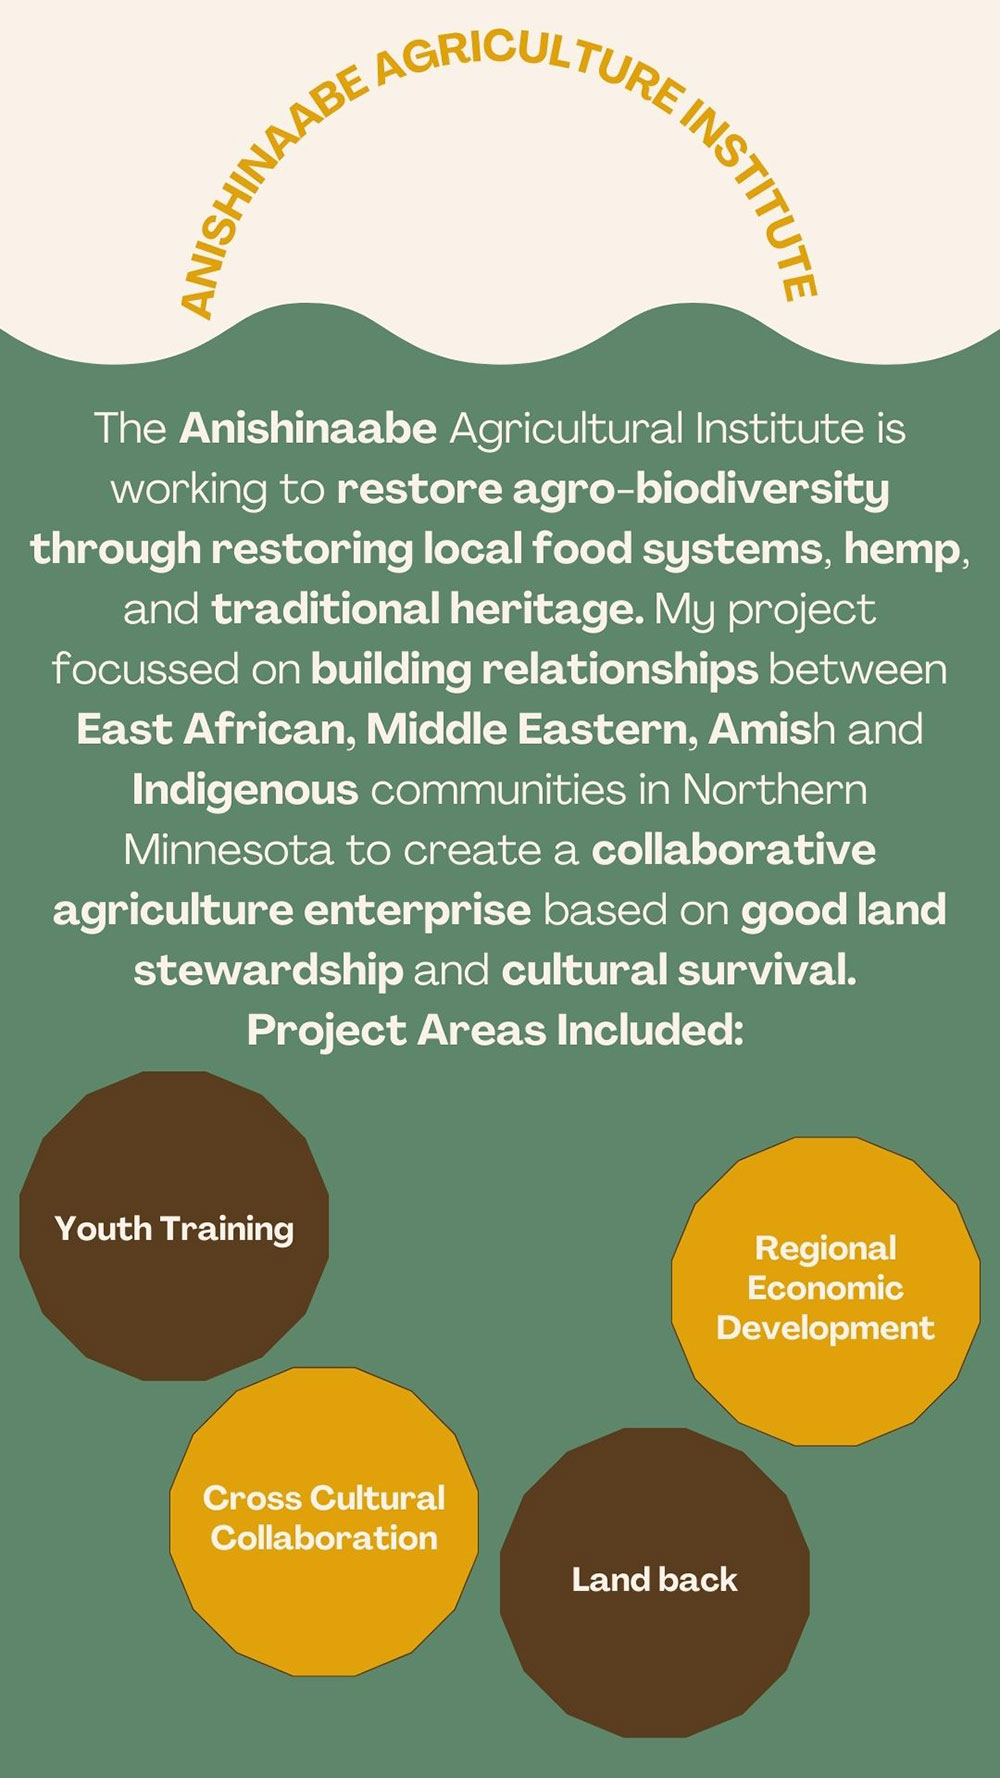 Anishinaabe Agriculture Institute poster